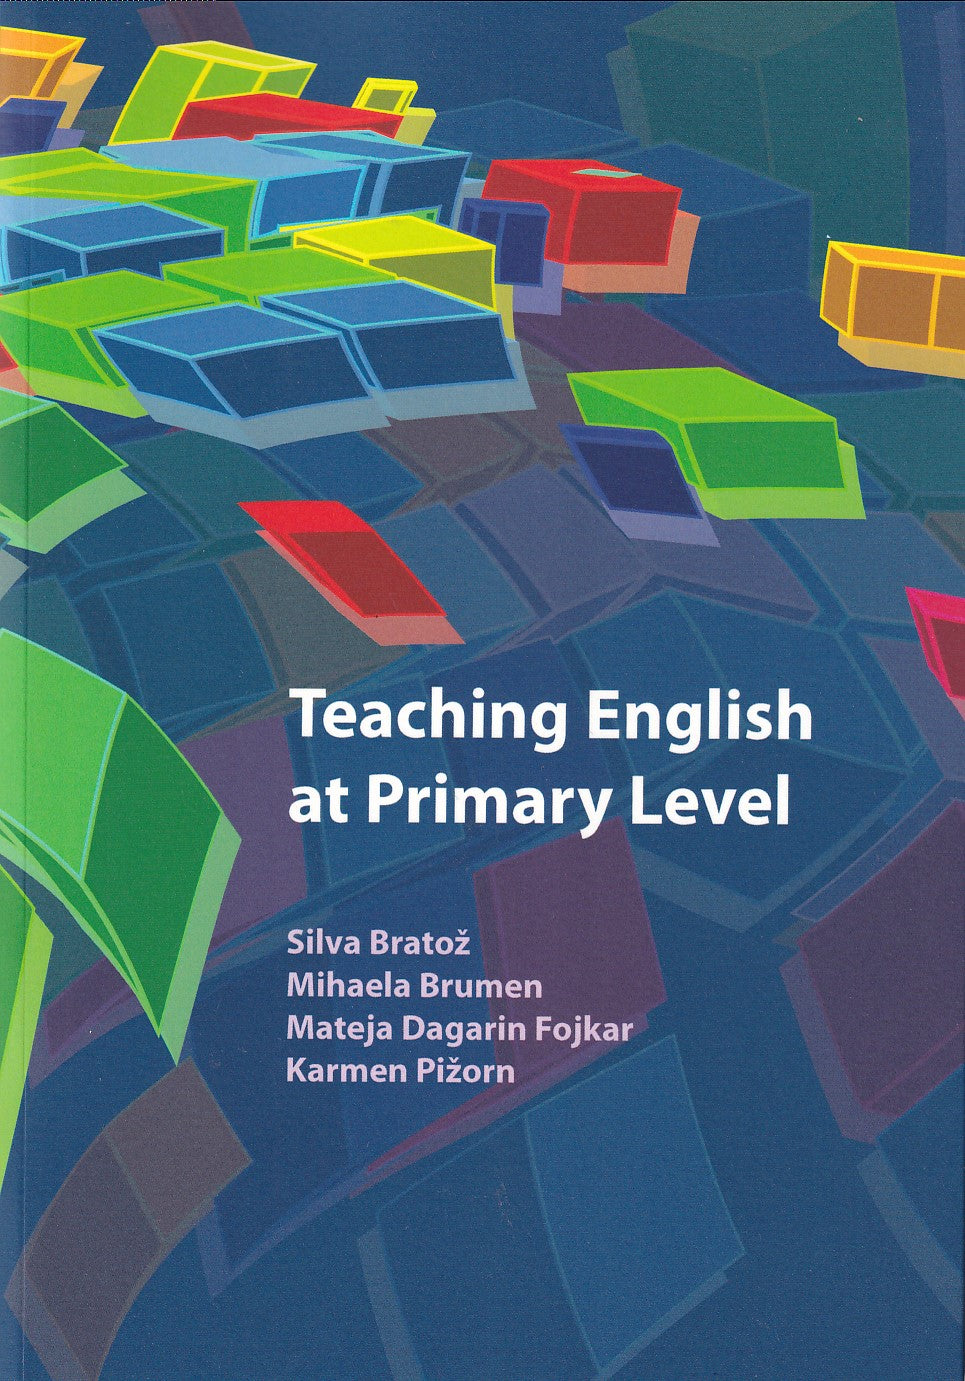 Teaching English at Primary Level